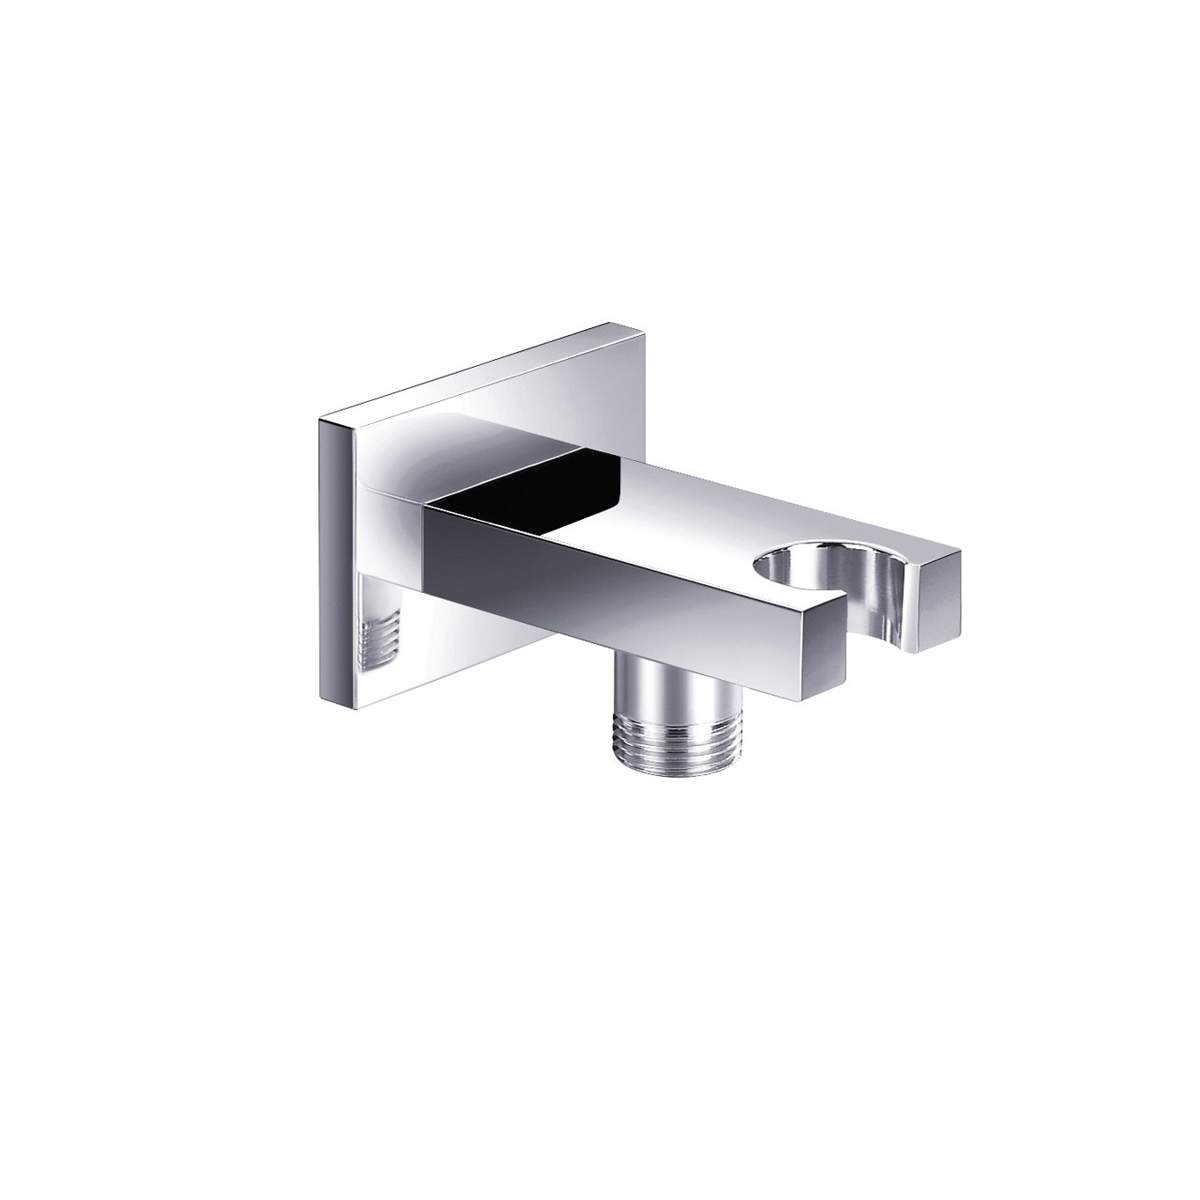 JTP Square Wall Outlet with Holder (30212)